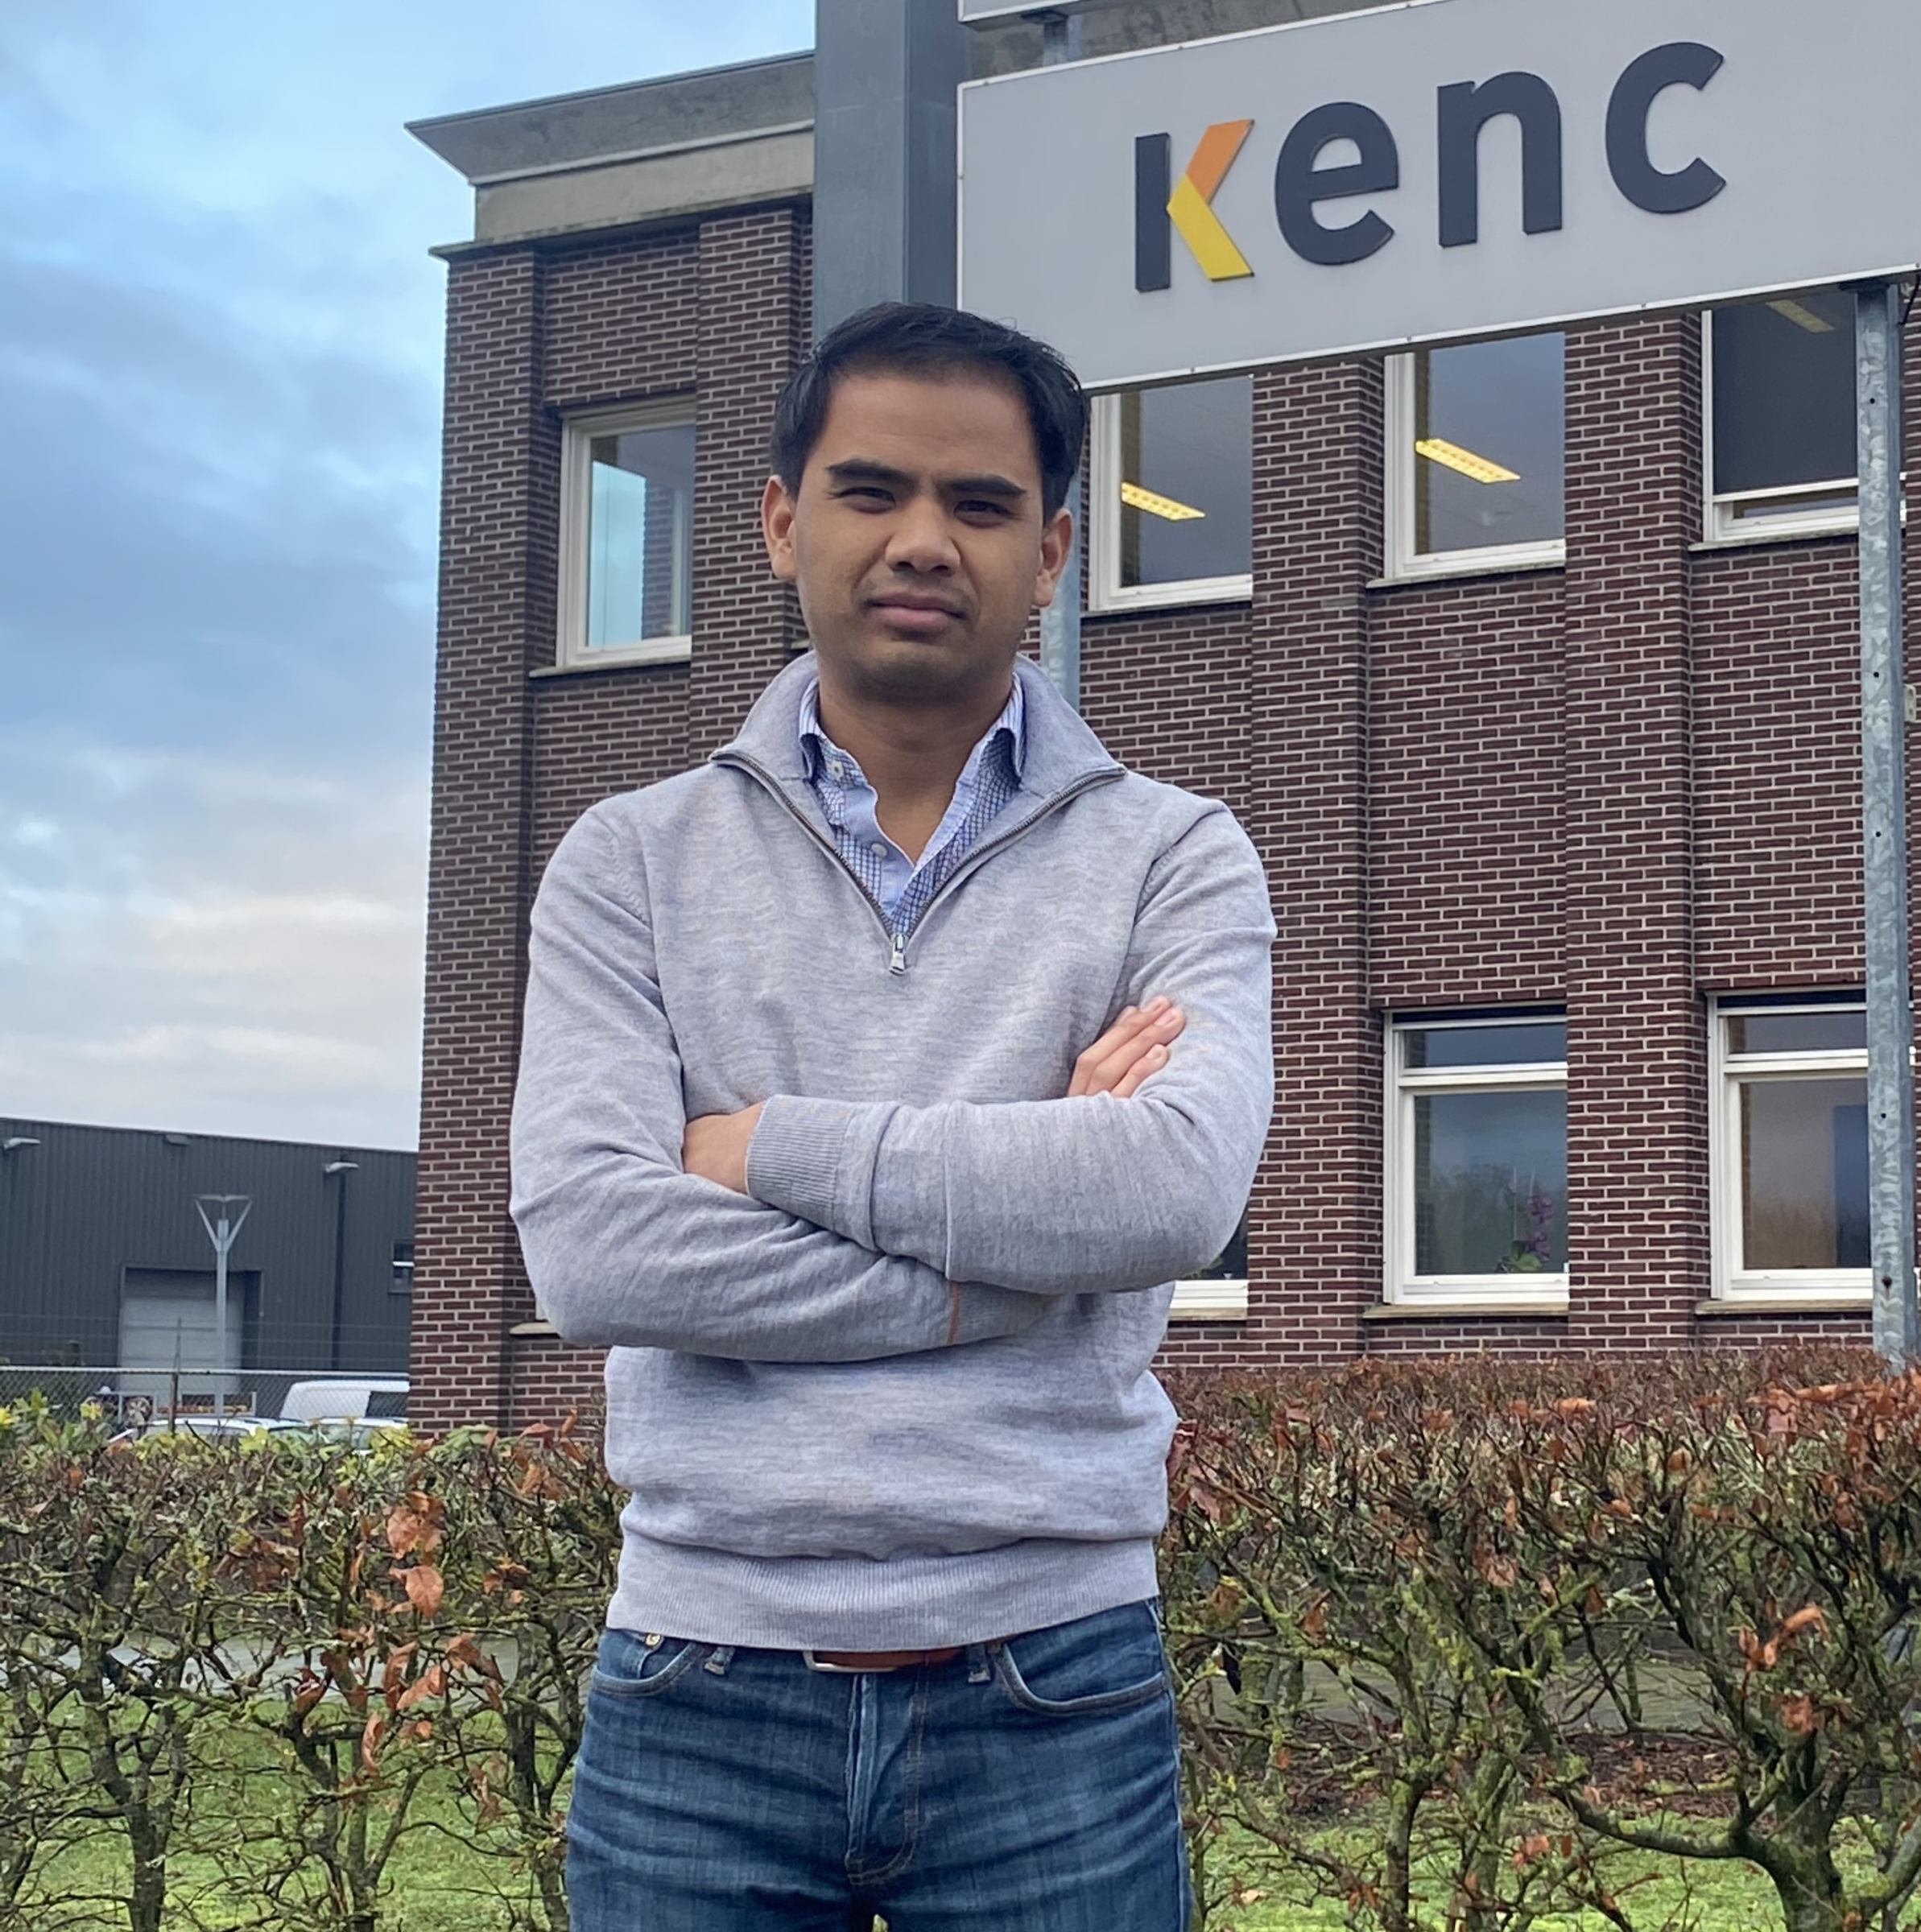 Vincent Vinkoert appointed as Business Development Manager at KENC Engineering